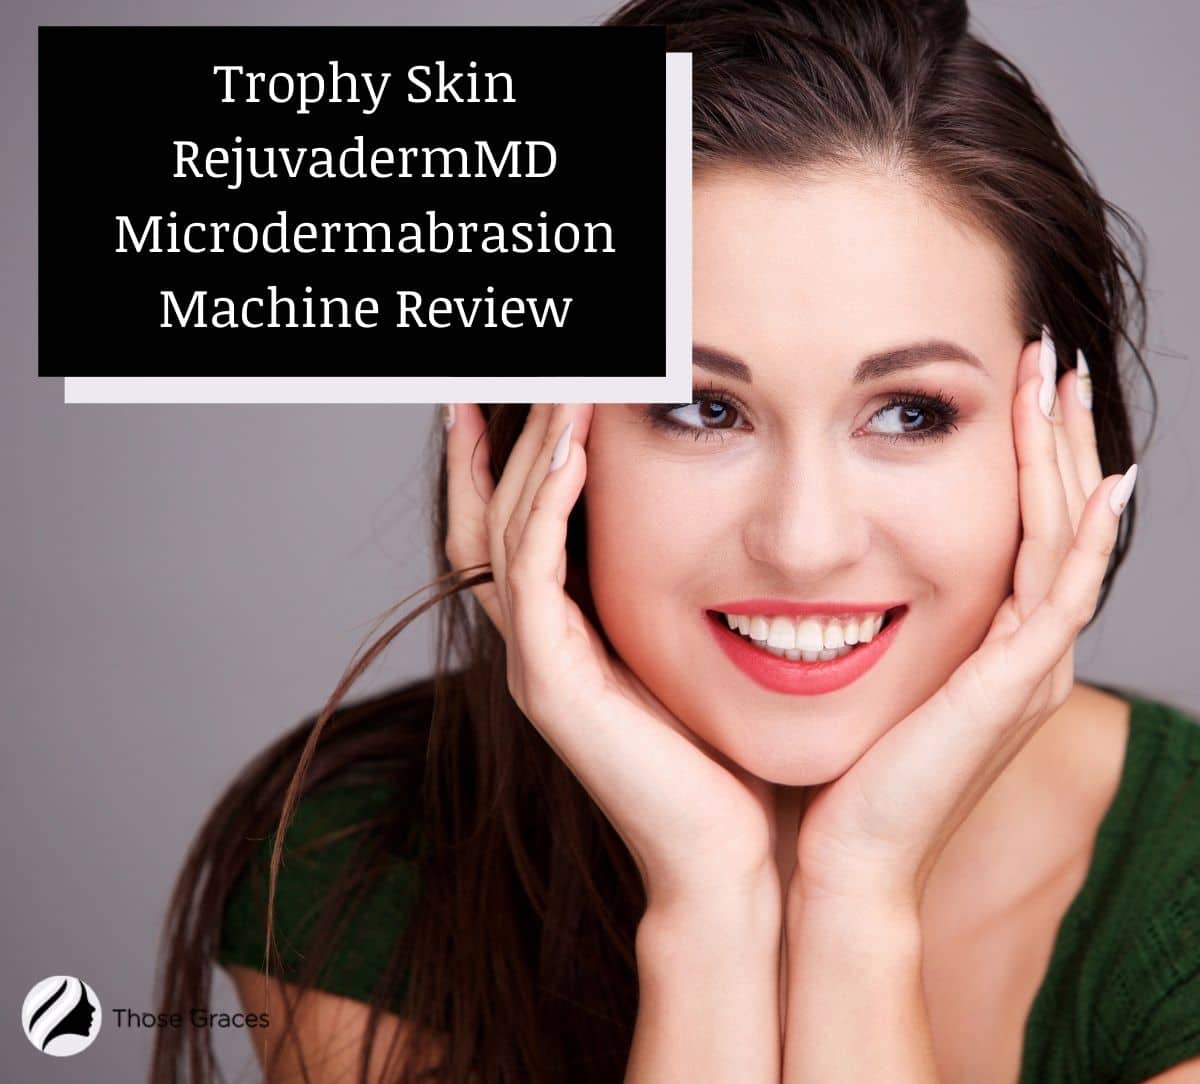 beautiful woman posing for the trophy skin rejuvadermmd microdermabrasion machine review